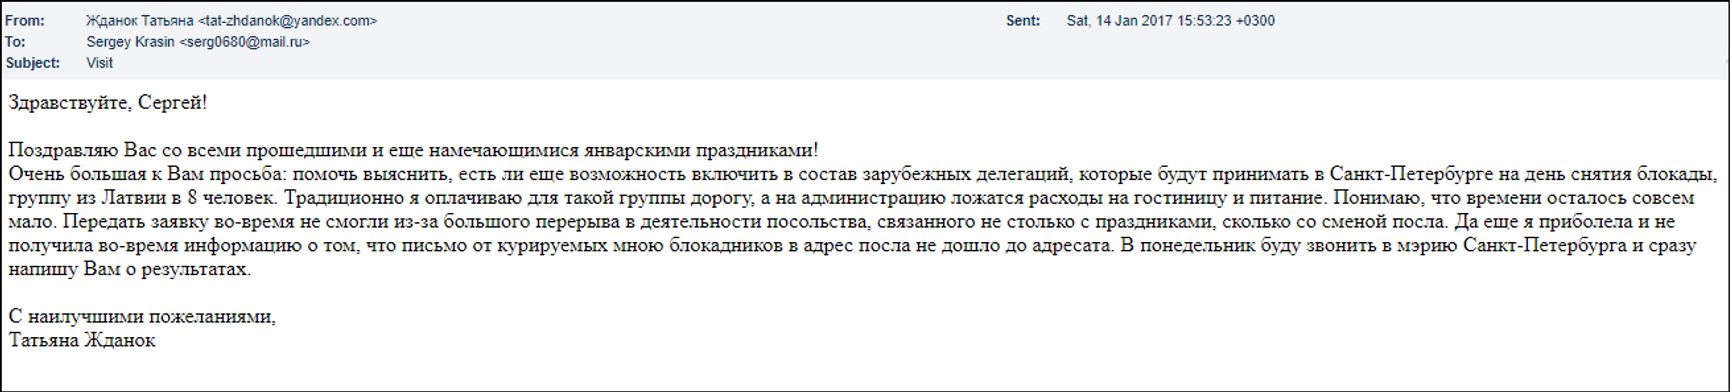 Email from Tatjana Ždanoka to her  FSB handler Sergey Beltyukov, dated January 14, 2017, where Ždanoka, apologizing for a late request,  asks Beltyukov help in inquiring whether a delegation of 8 Latvians can attend an event commemorating the Red Army’s breaking of the Nazi blockade of Leningrad in St. Petersburg. 